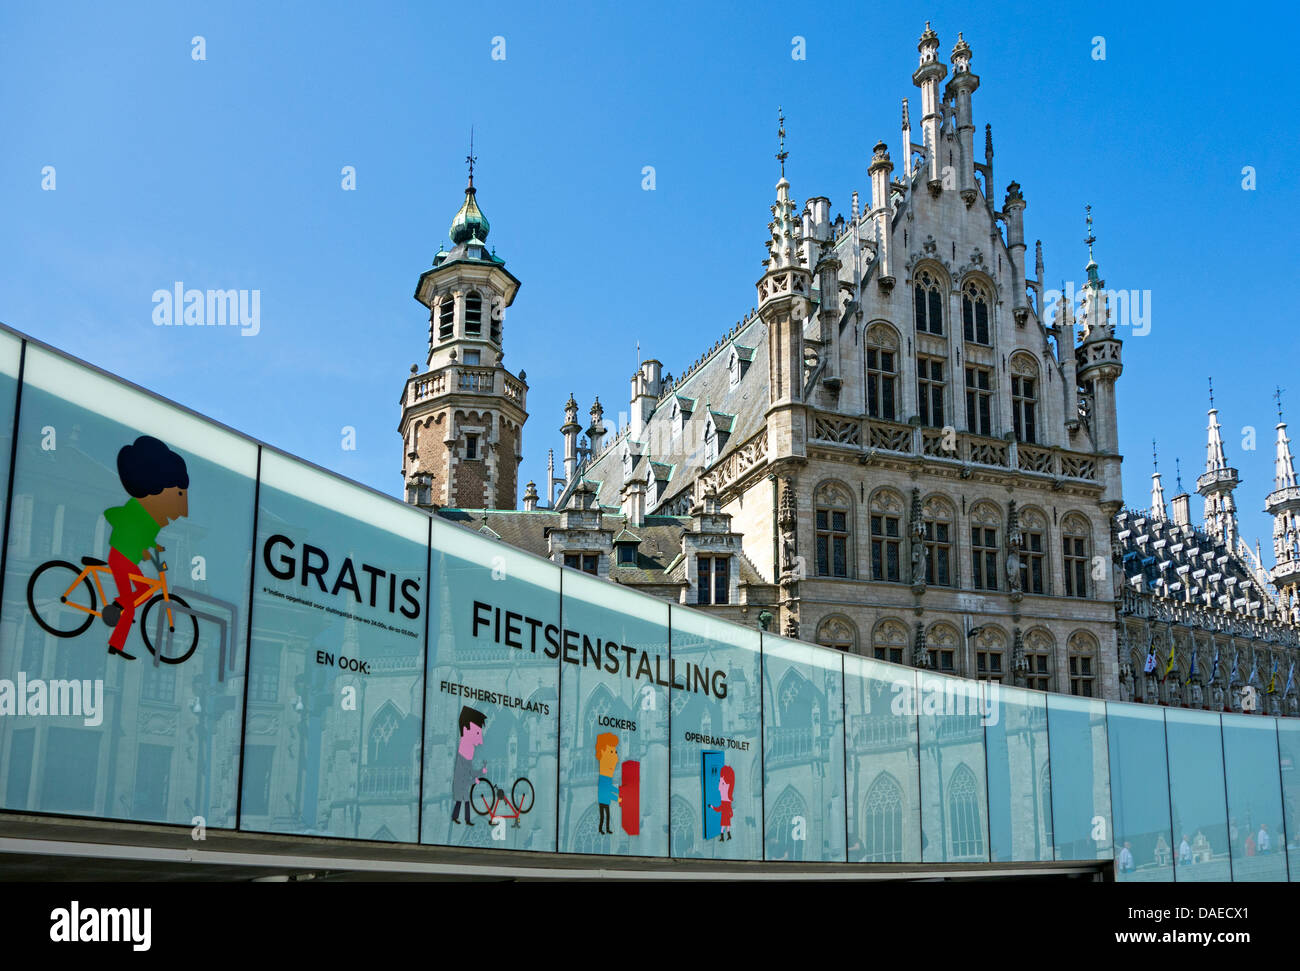 Free guarded underground bicycle shed for cyclists in the city centre of Leuven / Louvain, Belgium Stock Photo